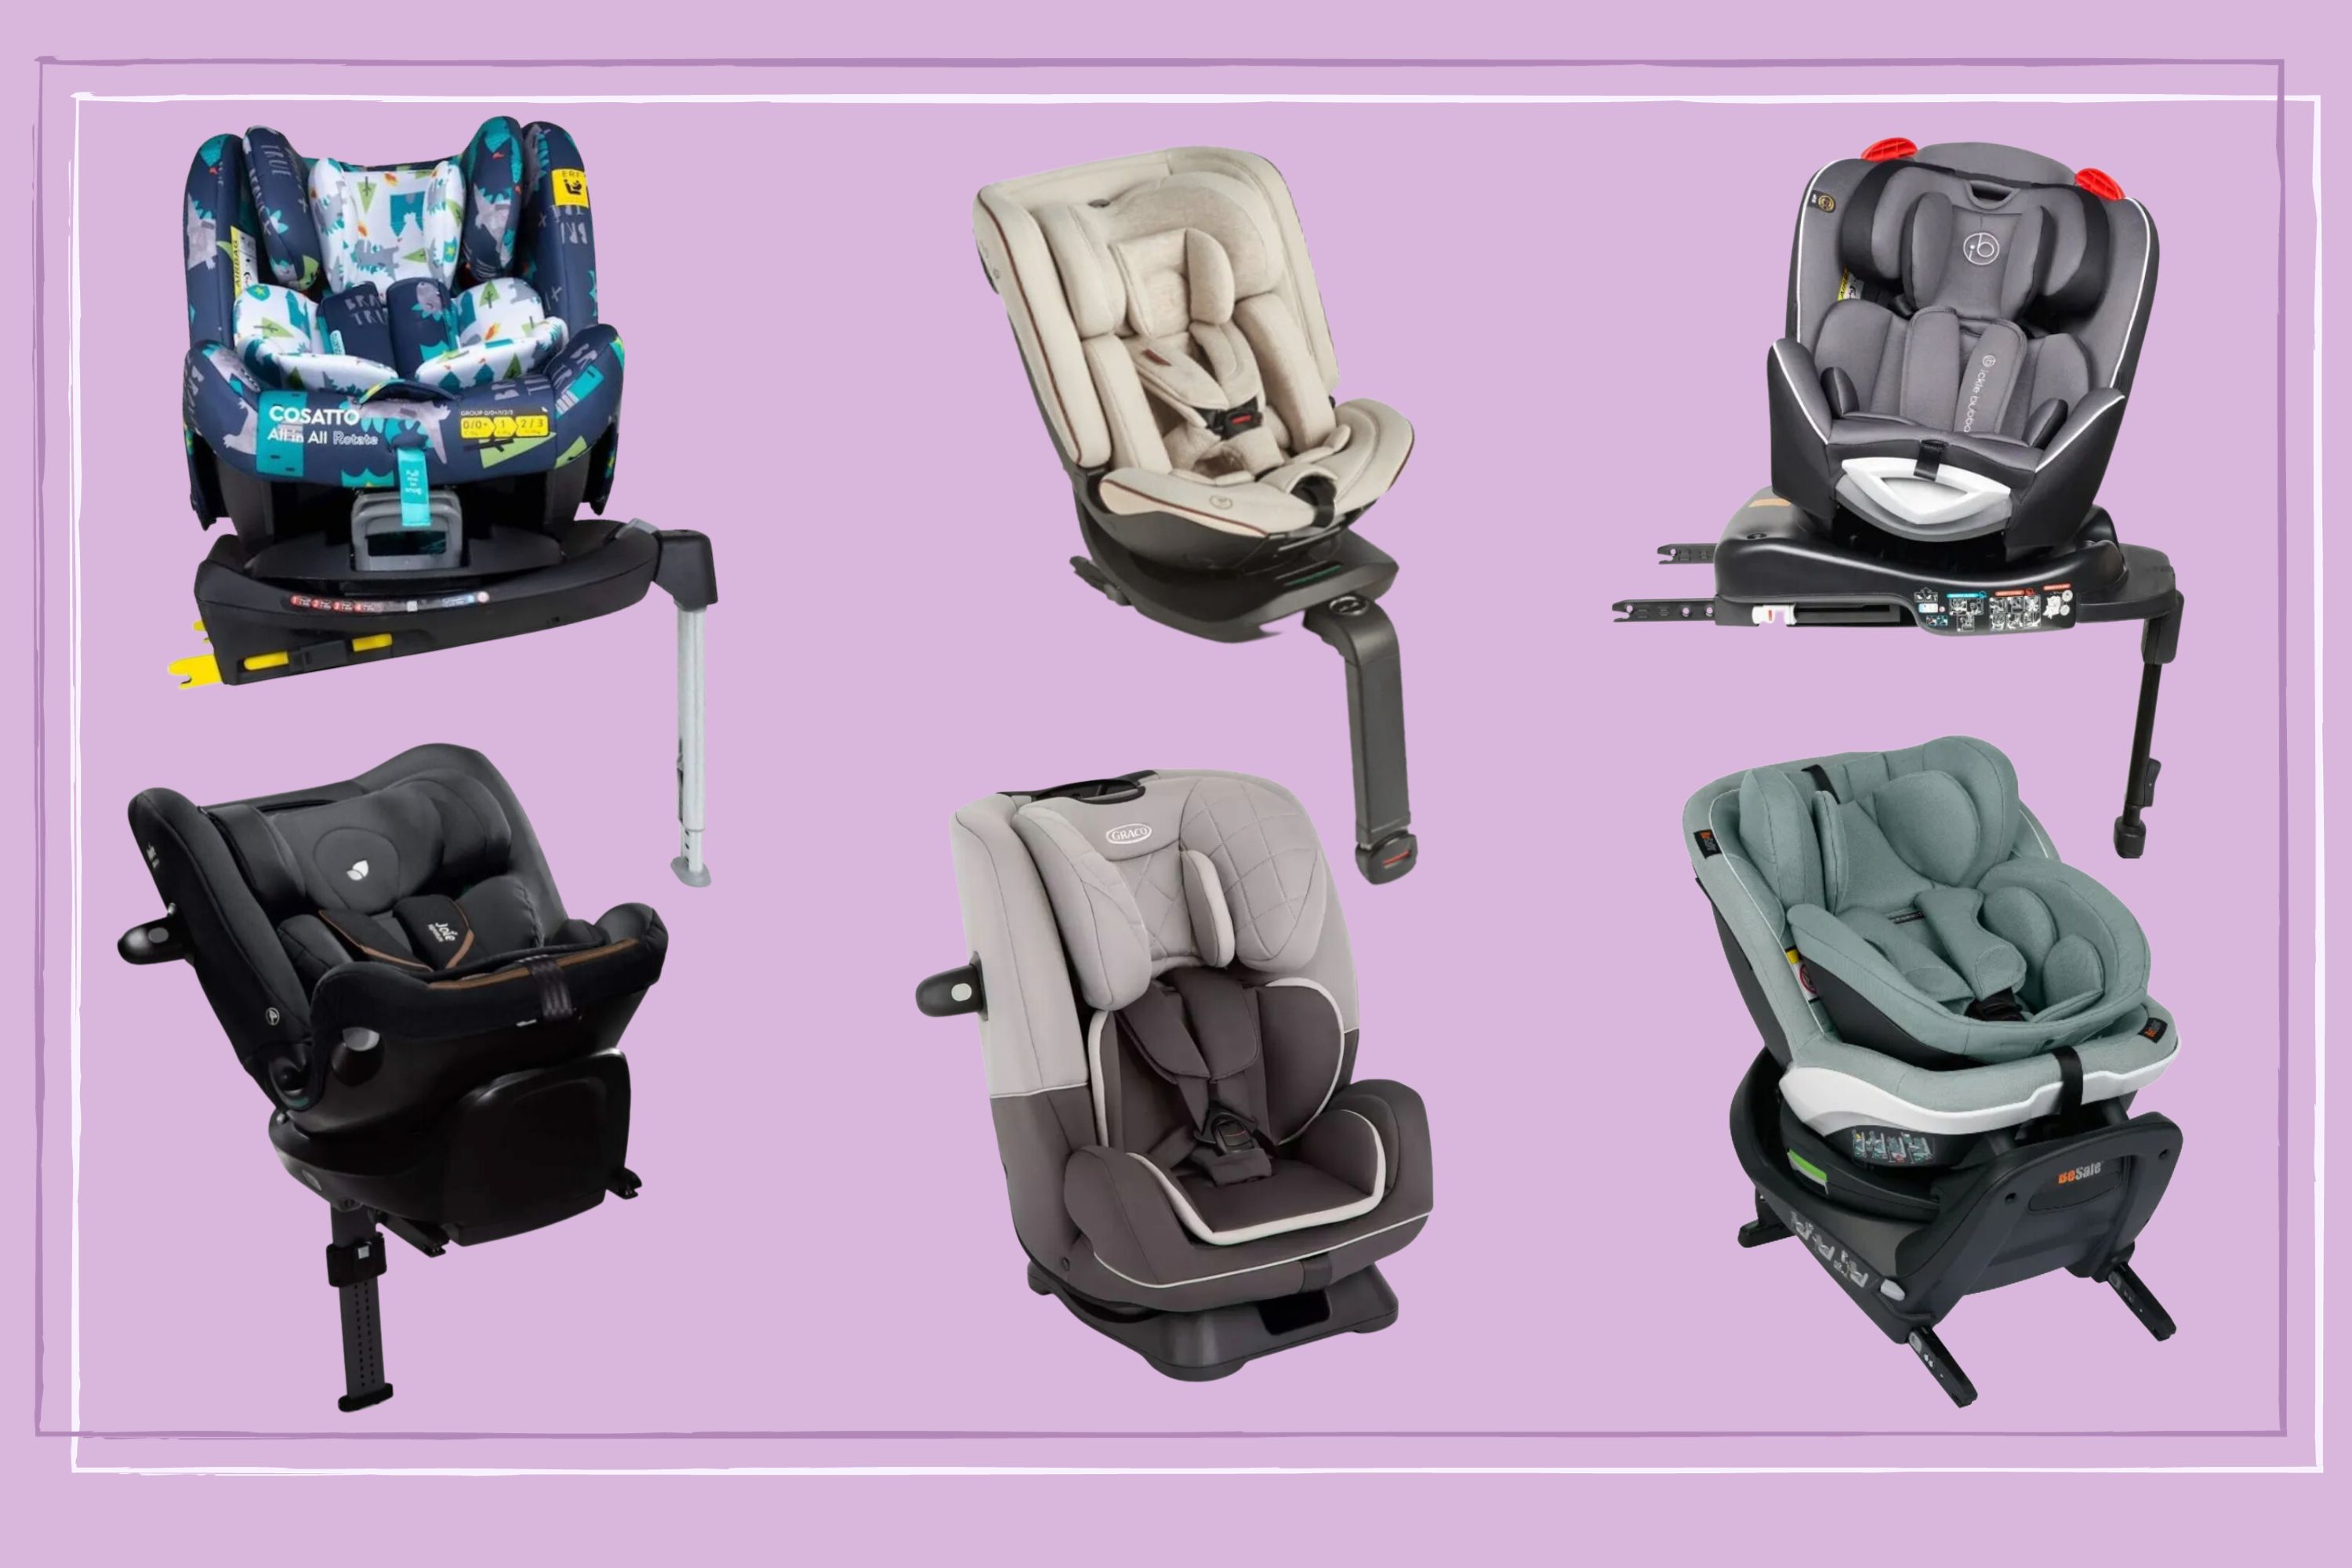 Rear Facing Car Seats For Toddlers - The Cybex Sirona is a car seat that  people often ask me about, so I thought I'd explain a little bit about it.  The Sirona